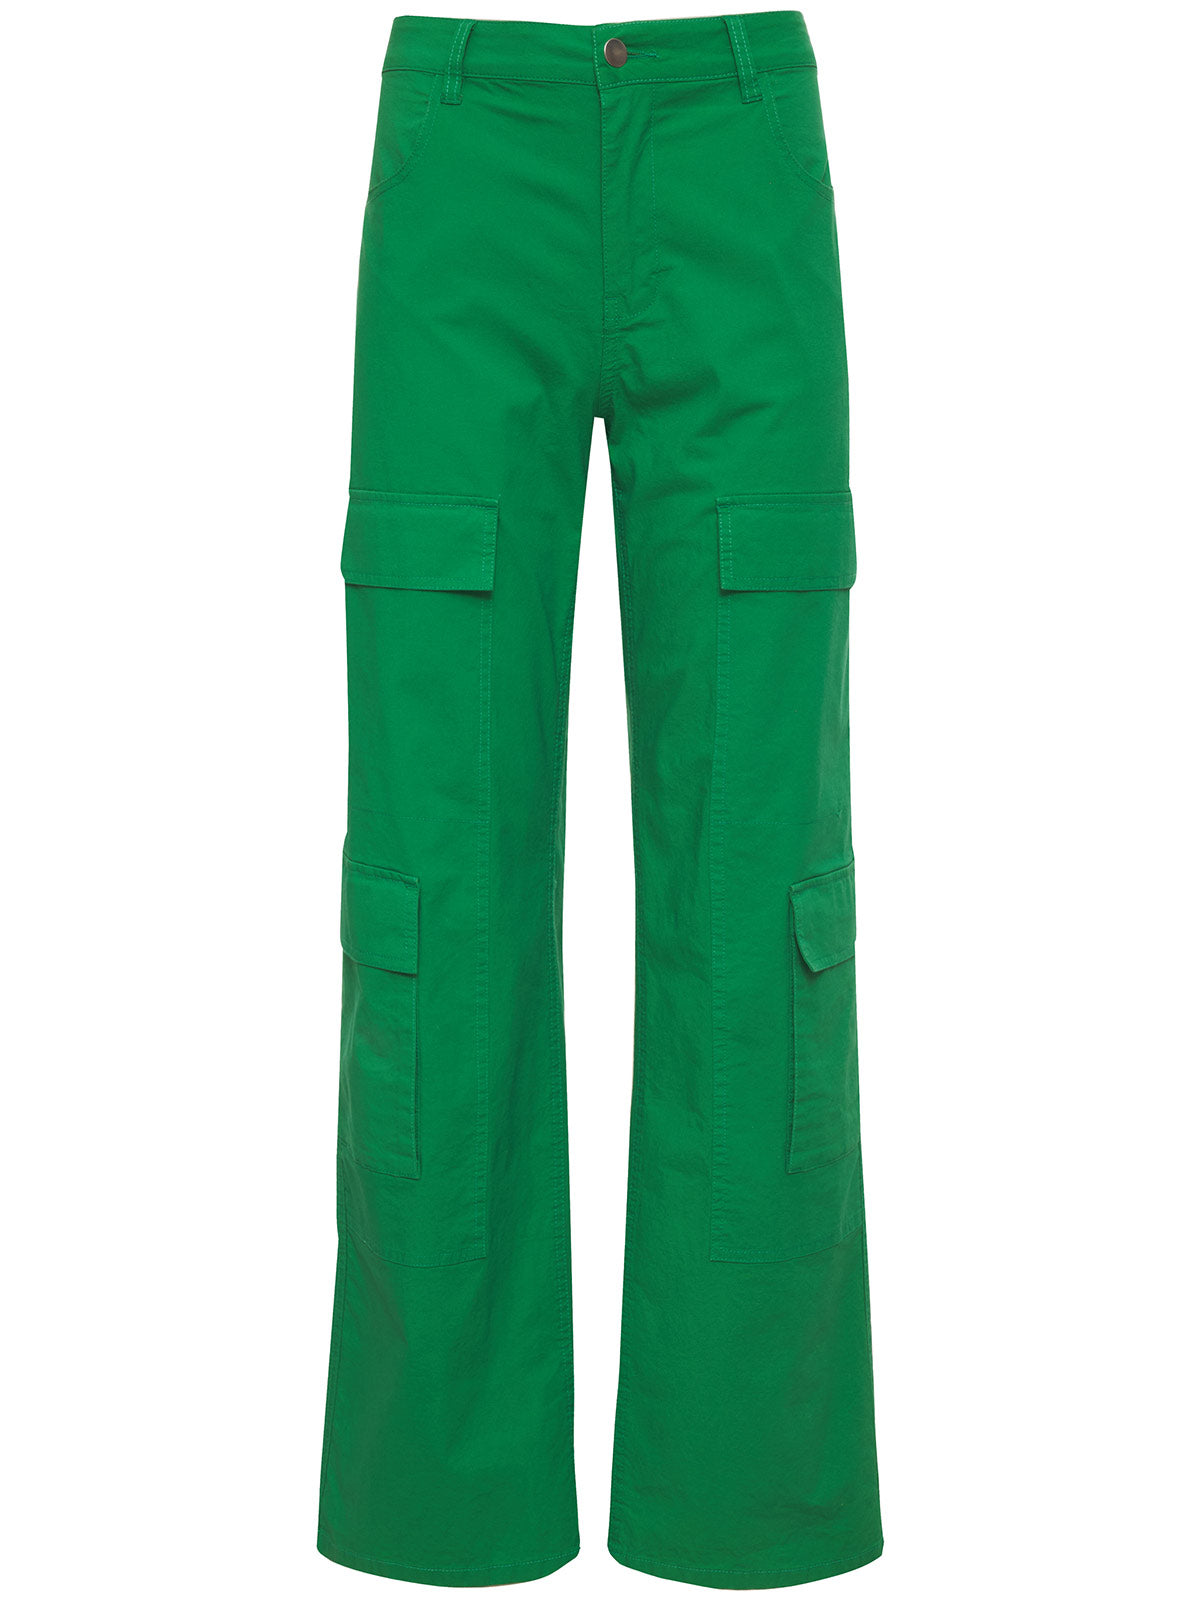 Low Slung Y2K Standard Rise Cargo Pant Jelly Bean